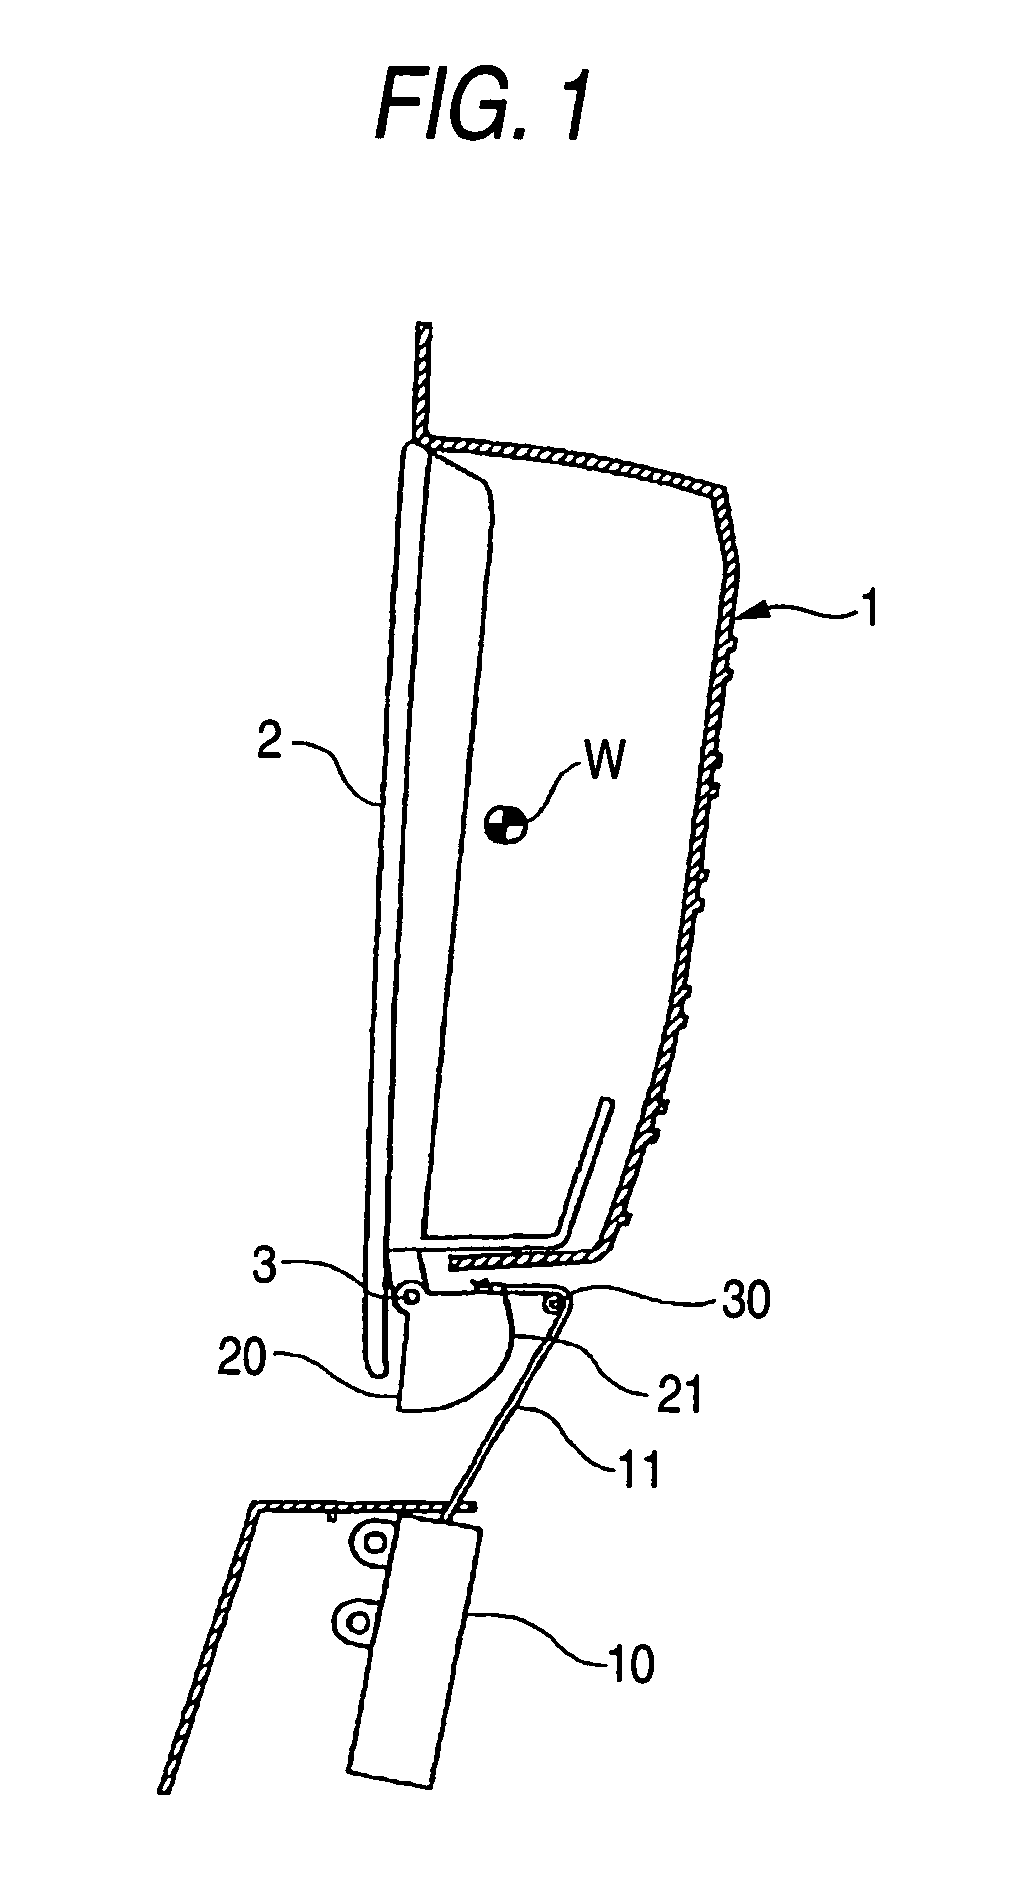 Storage apparatus for vehicle